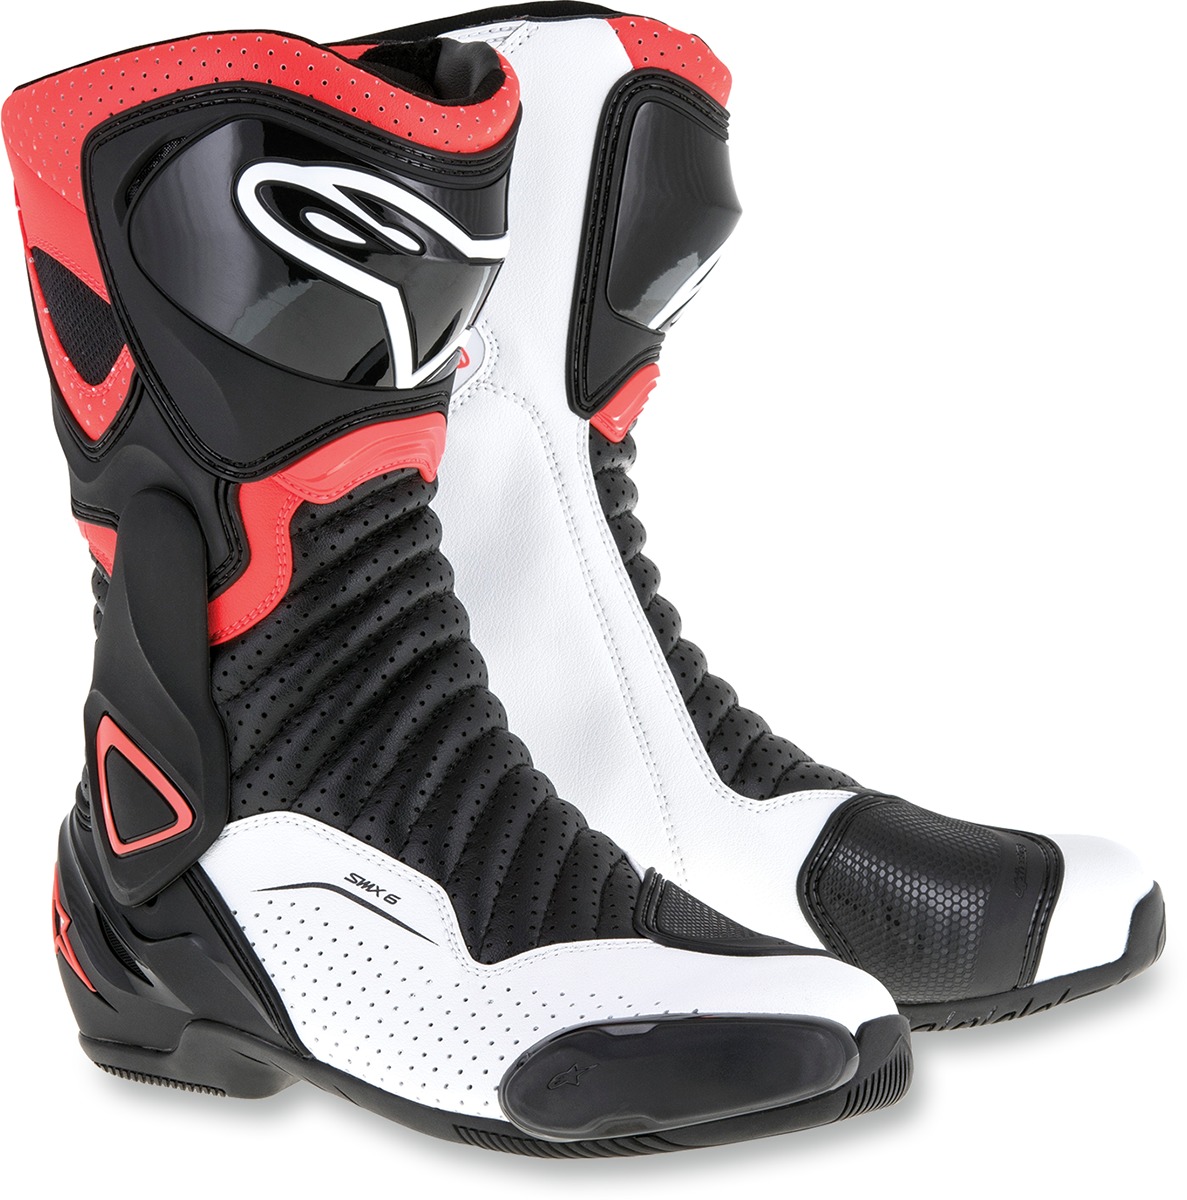 SMX-6v2 Vented Street Riding Boots Black/Red/White US 4 - Click Image to Close